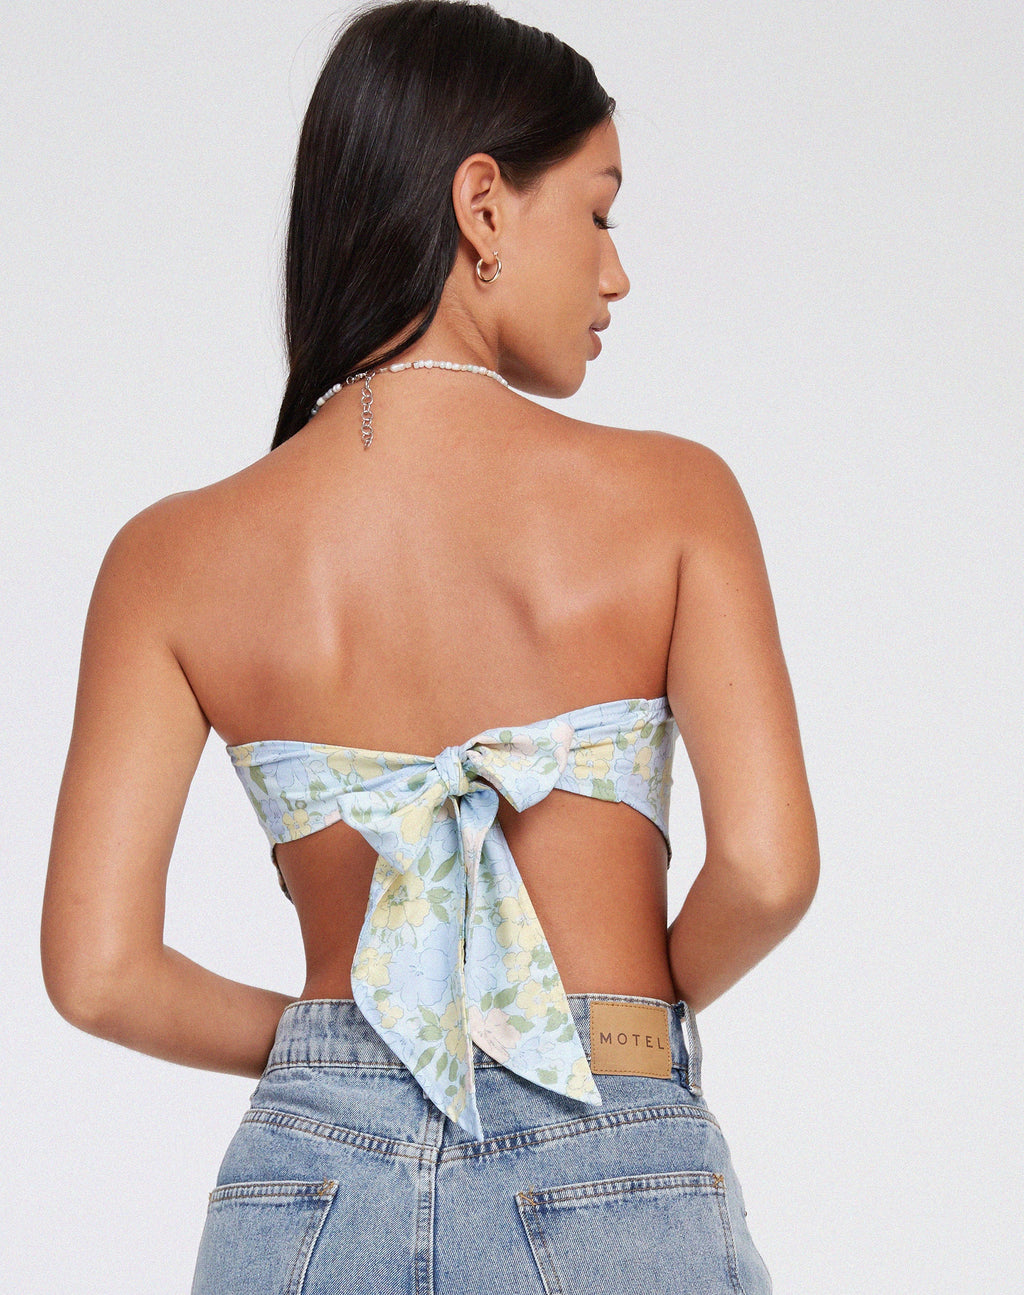 Nolda Crop Top in Washed Out Pastel Floral